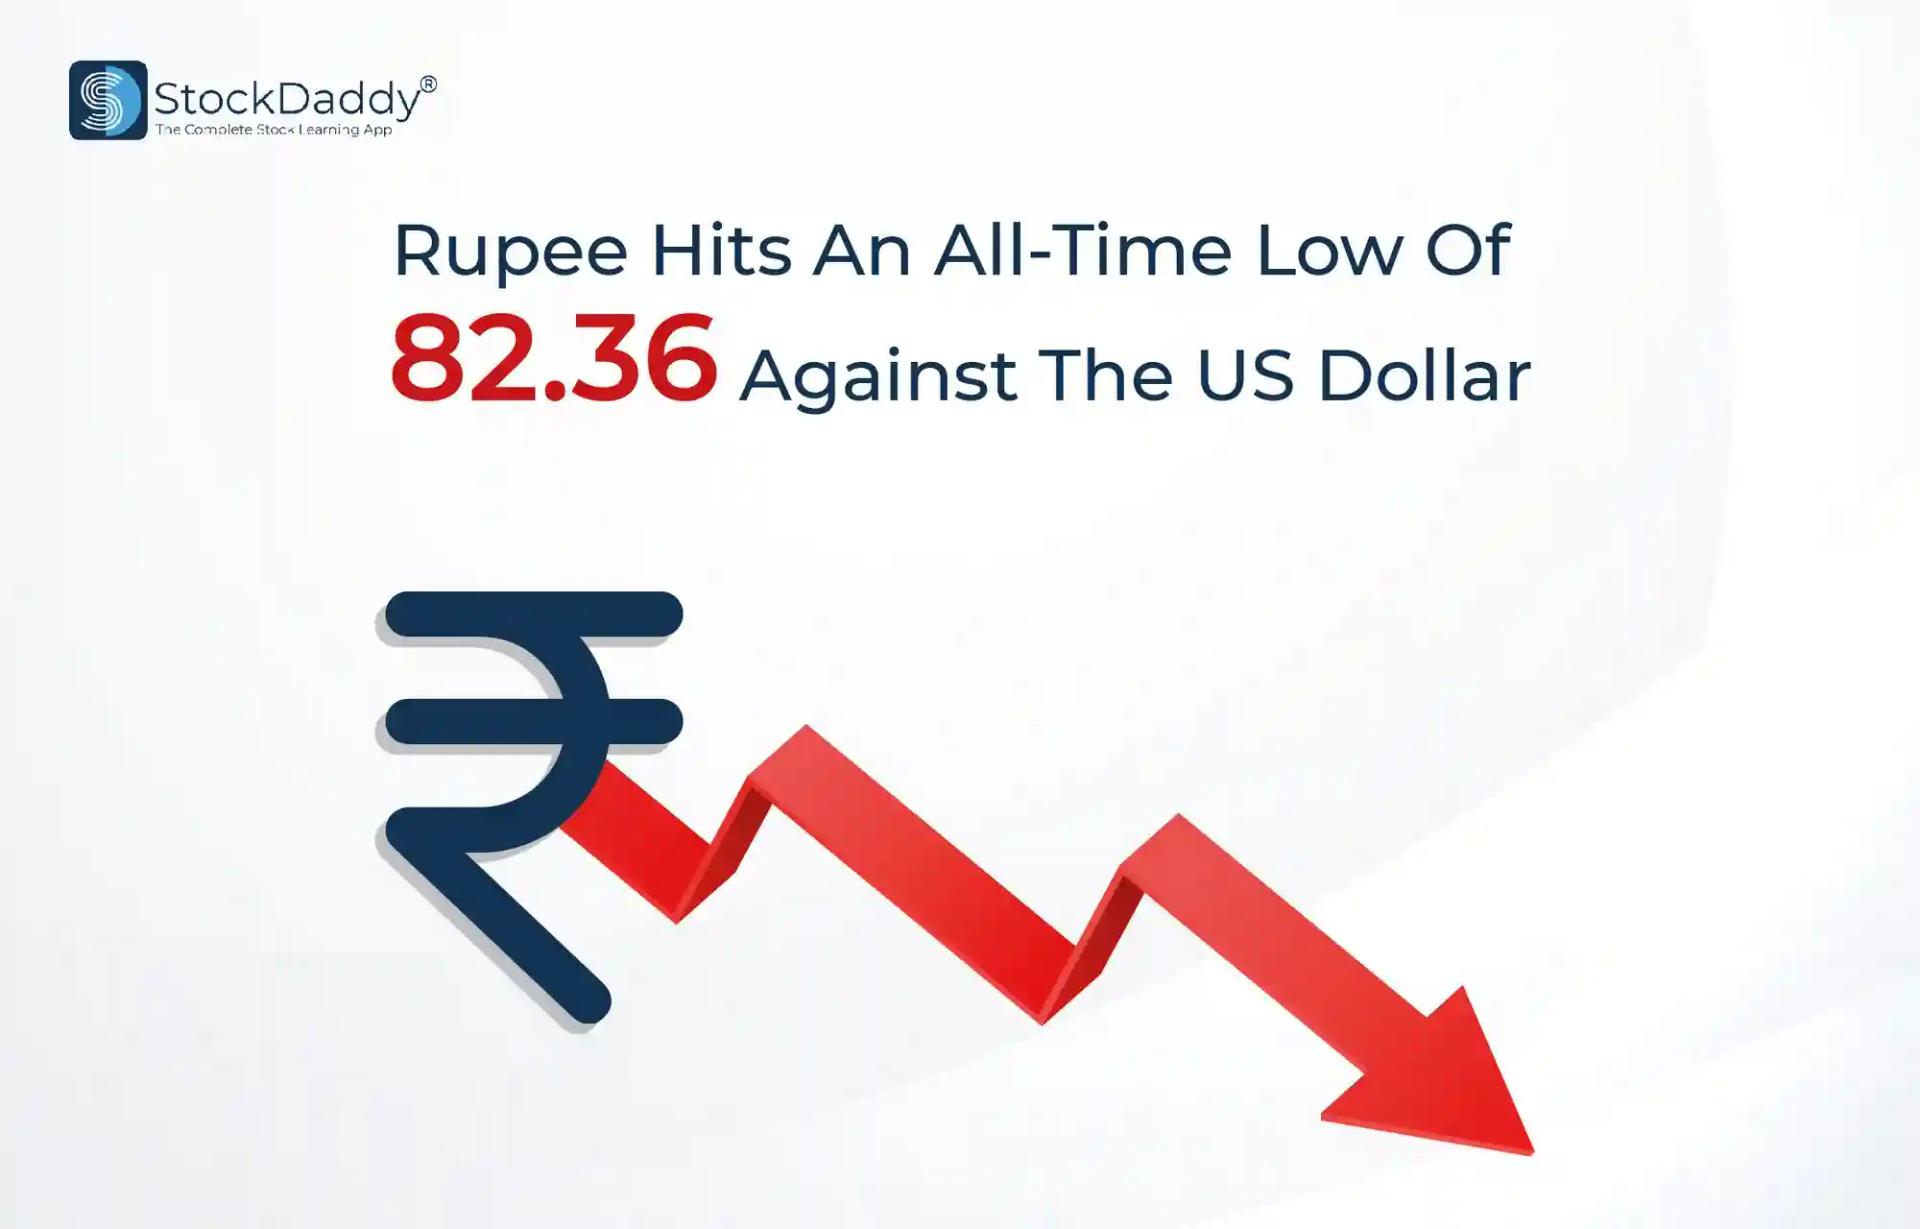 Rupee Hits an All-time Low of 82.36 Against US Dollar